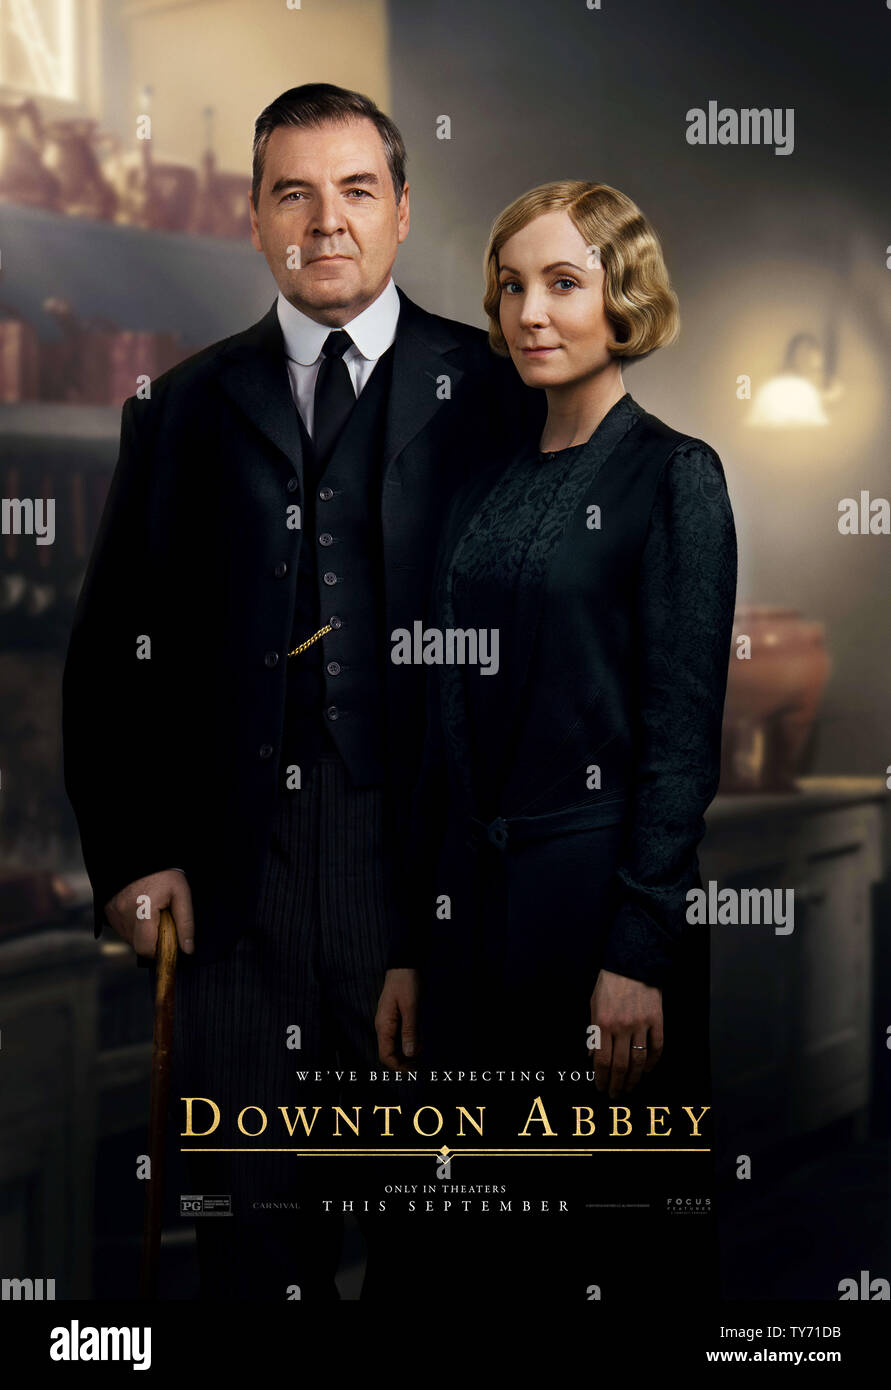 RELEASE DATE: September 20, 2019 TITLE: Downton Abbey STUDIO: Focus Features DIRECTOR: Michael Engler PLOT: Adapted from the hit TV series Downton Abbey that tells the story of the Crawley family, a wealthy owner of a large estate in the English countryside in the early 20th century. STARRING: BRENDAN COYLE as John Bates, JOANNE FROGGATT as Anna Bates. (Credit Image: © Focus Features/Entertainment Pictures) Stock Photo